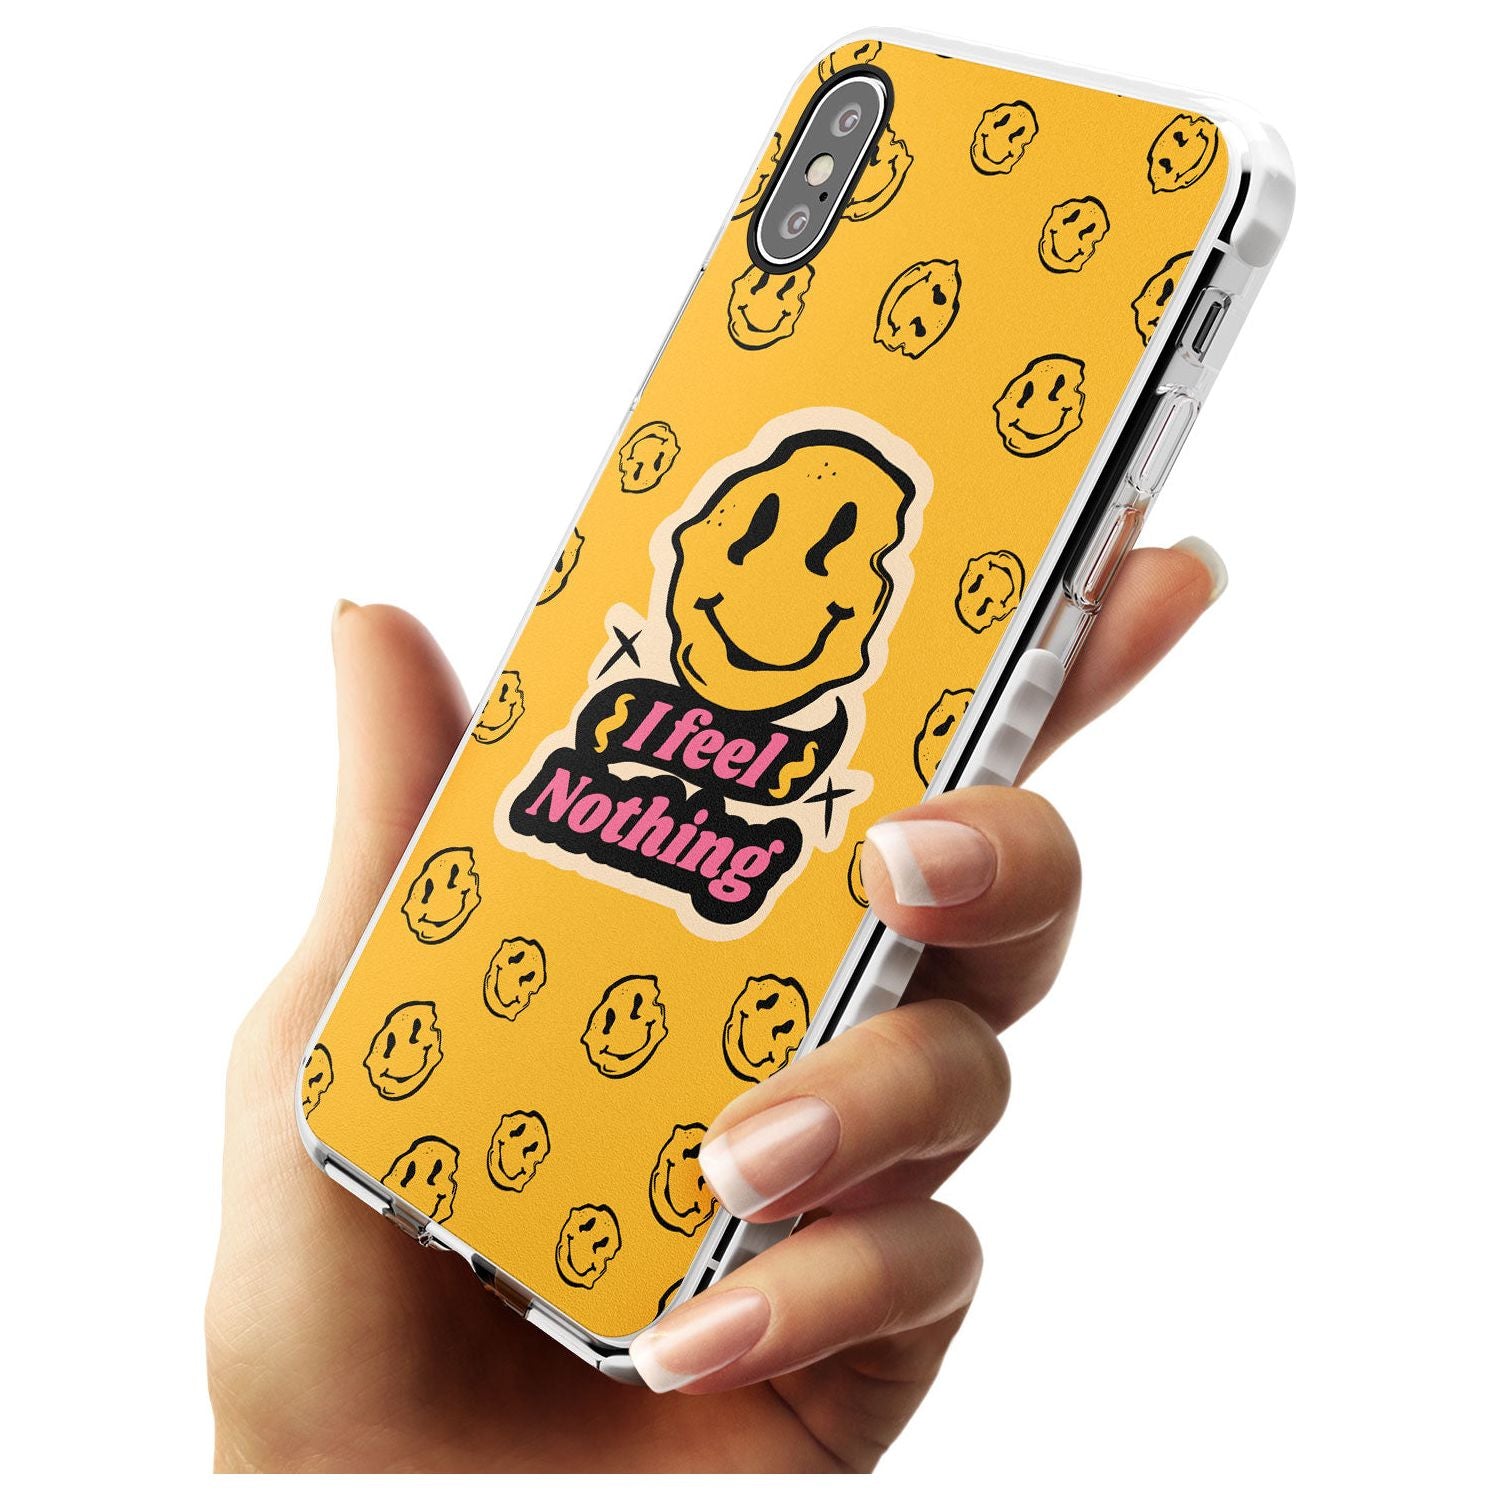 I feel nothing Impact Phone Case for iPhone X XS Max XR